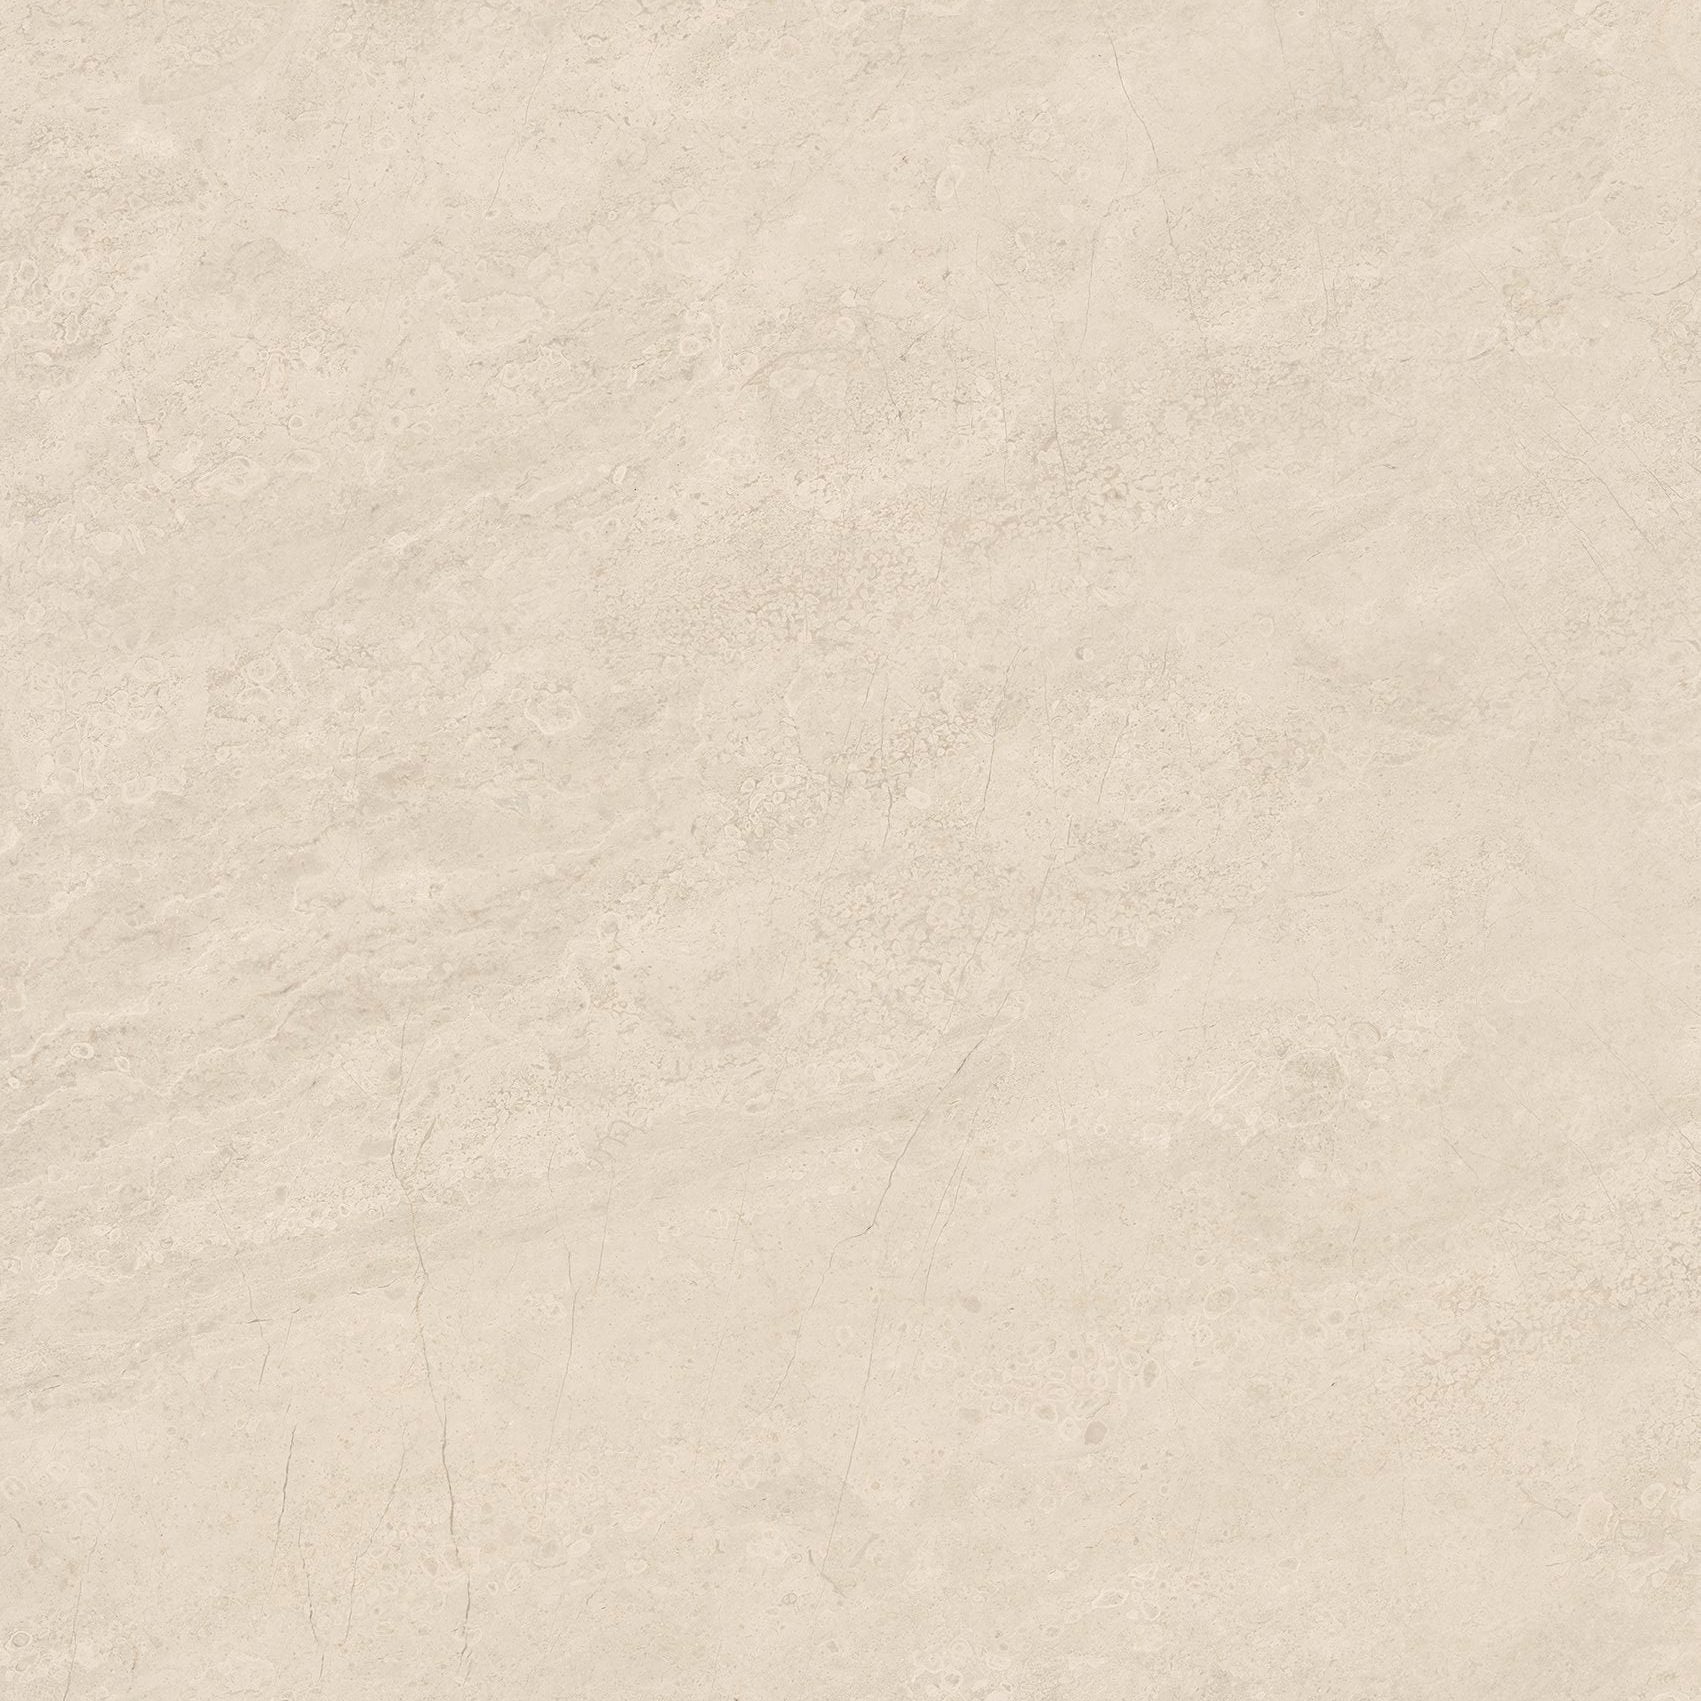 Anatolia Mayfair 24 in. x 24 in. HD Rectified Porcelain Tile - Allure Ivory (Matte)